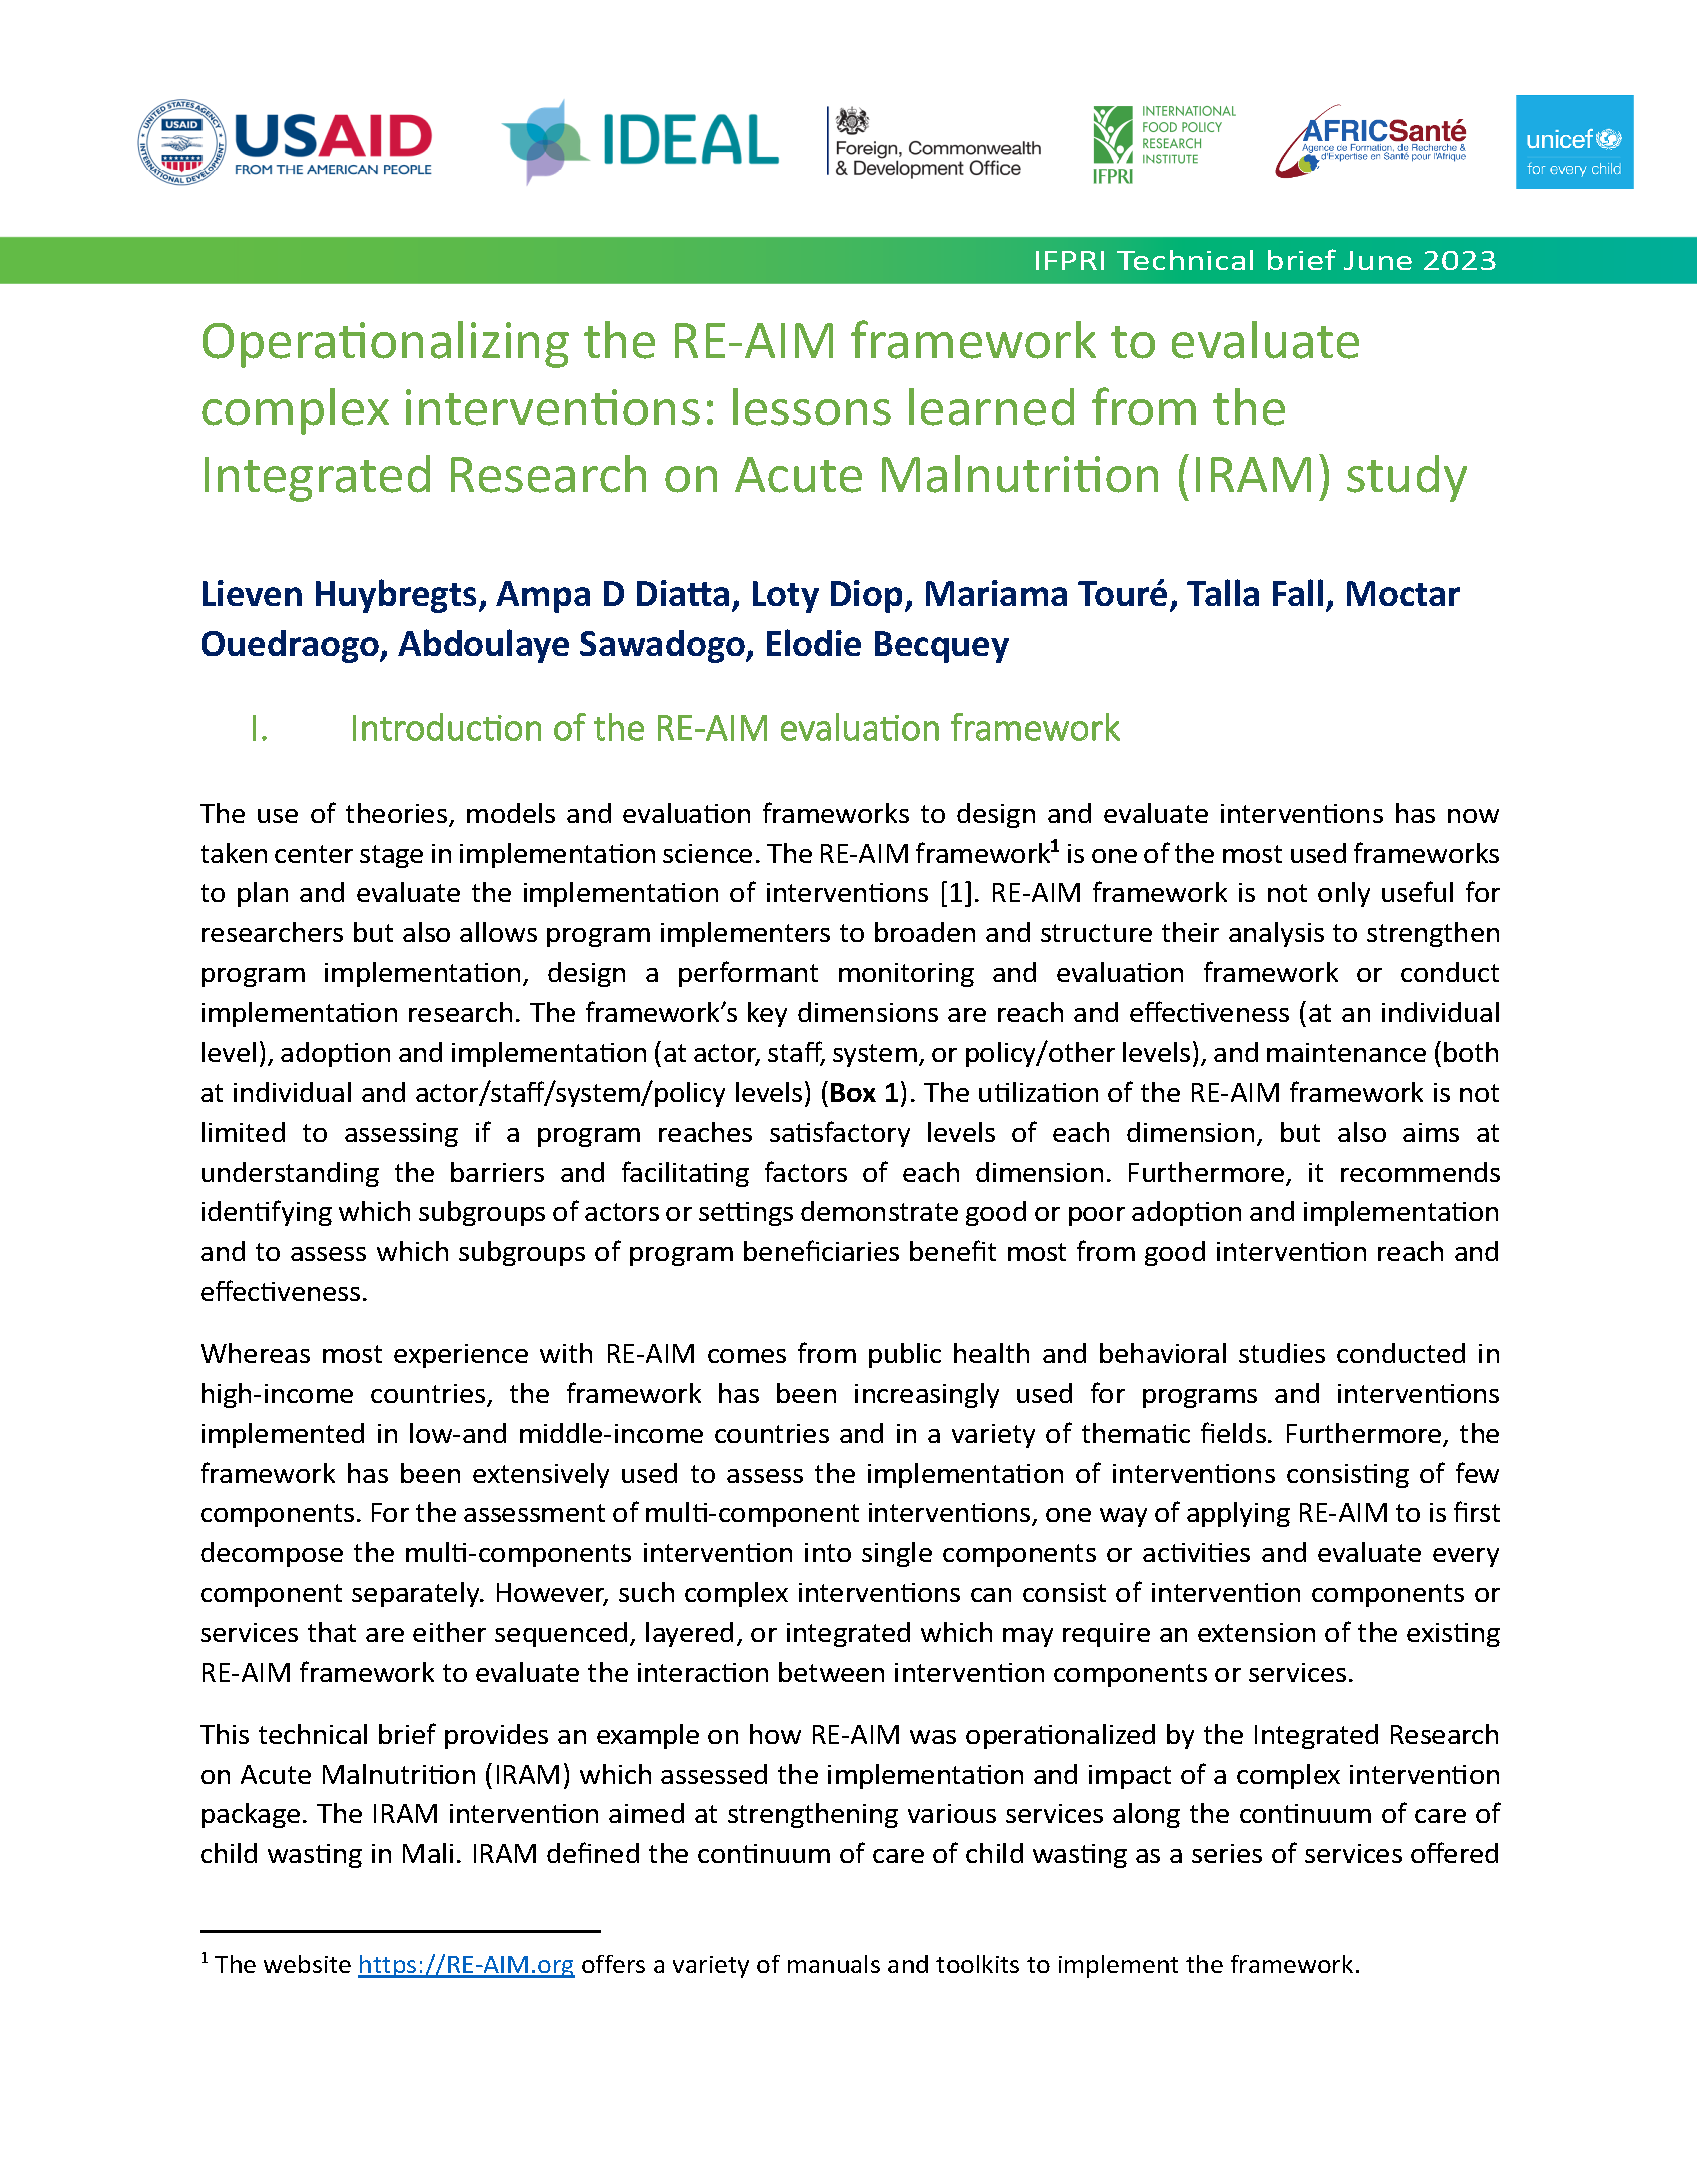 Cover page for Operationalizing the RE-AIM Framework to Evaluate Complex Intervention Interventions: Lessons Learned From the Integrated Research on Acute Malnutrition (IRAM) Study